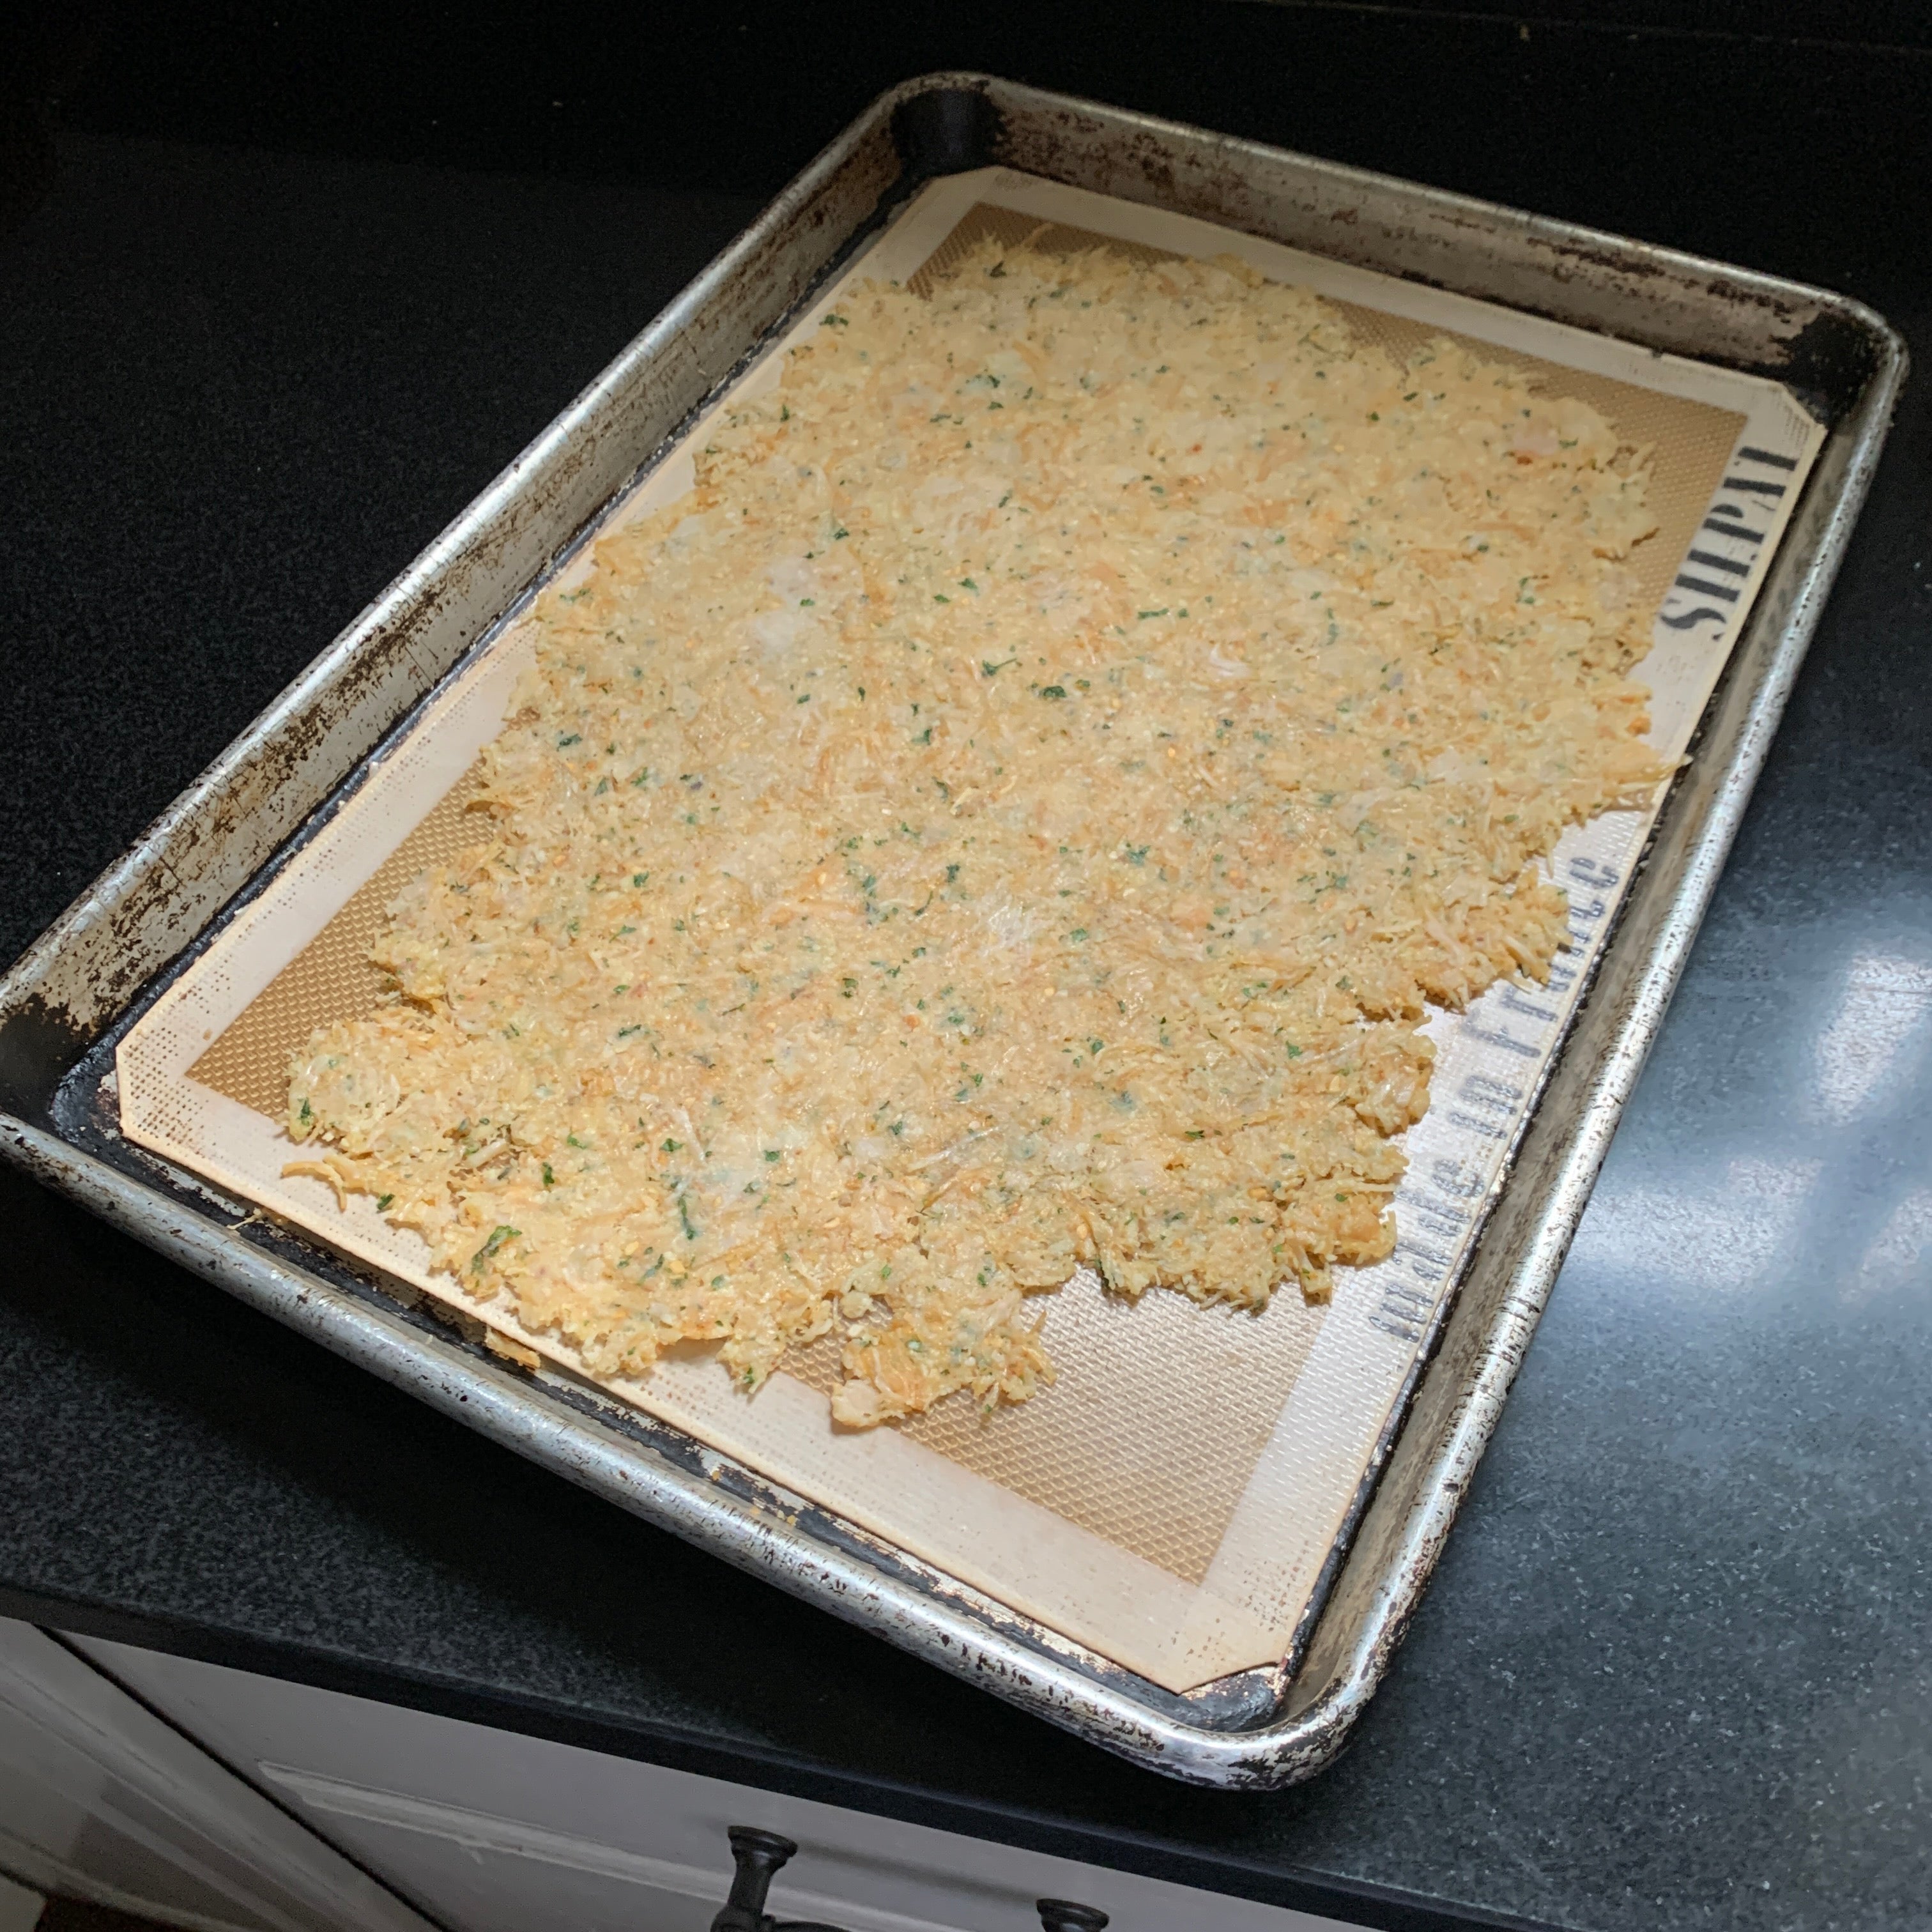 Image of Bake the crust for 8-10 minutes at 500° F.